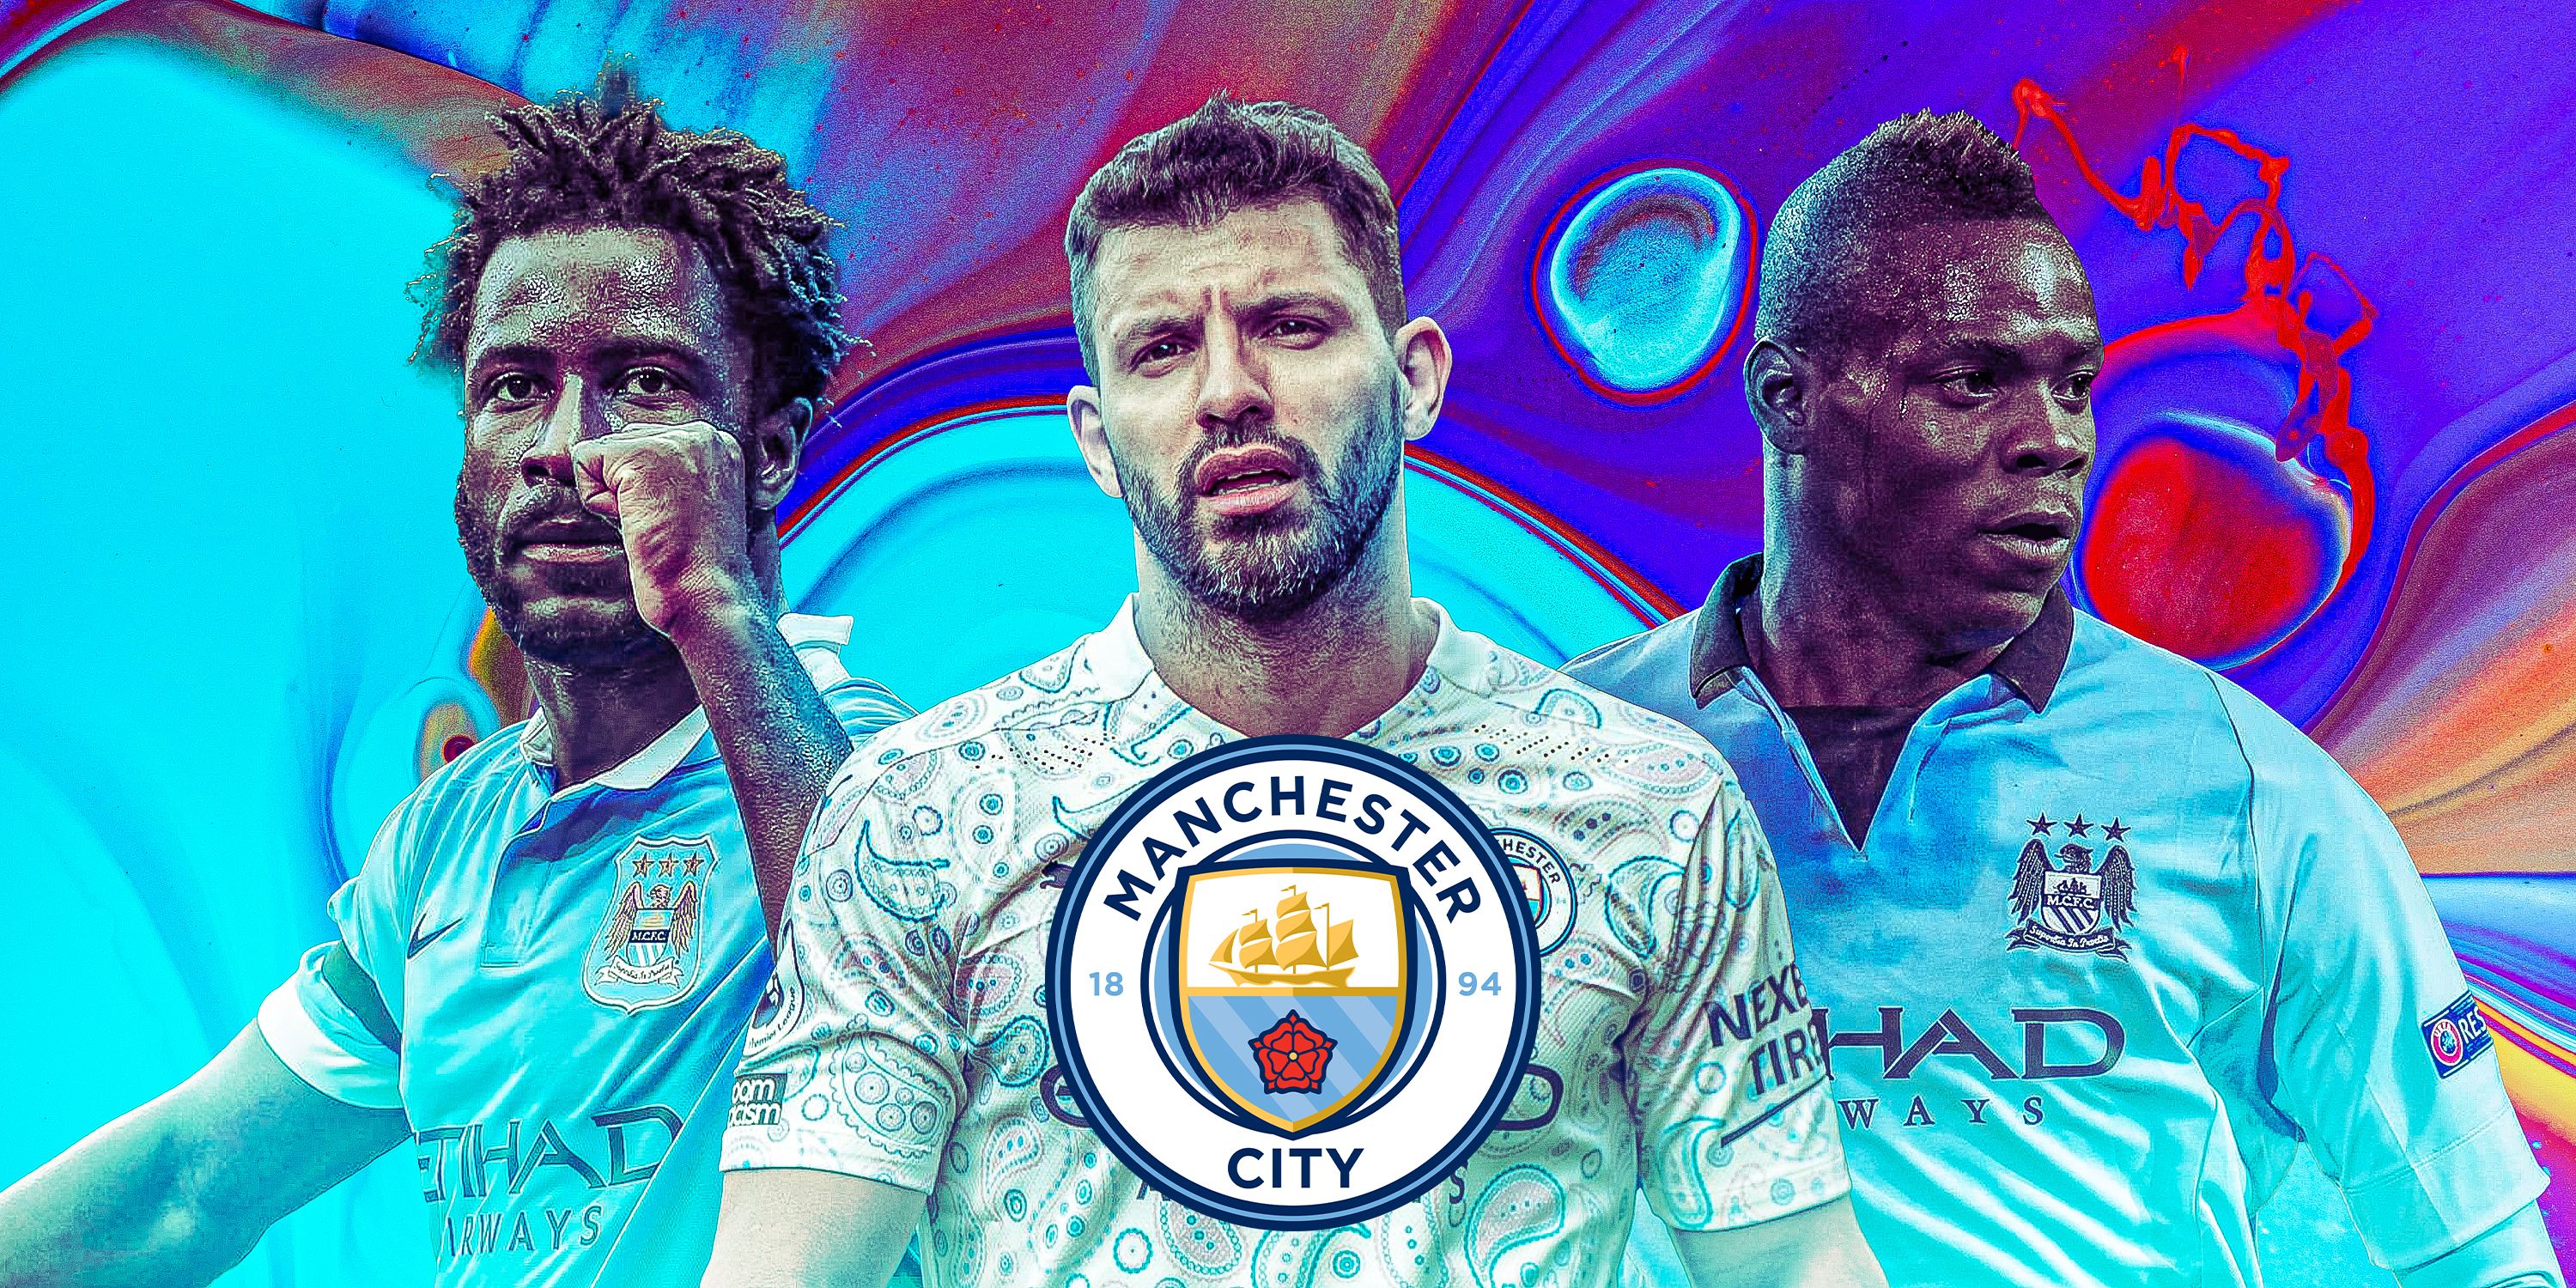 Sergio Aguero, Mario Balotelli and Wilfried Bony all in Man City kit with Man City badge in background